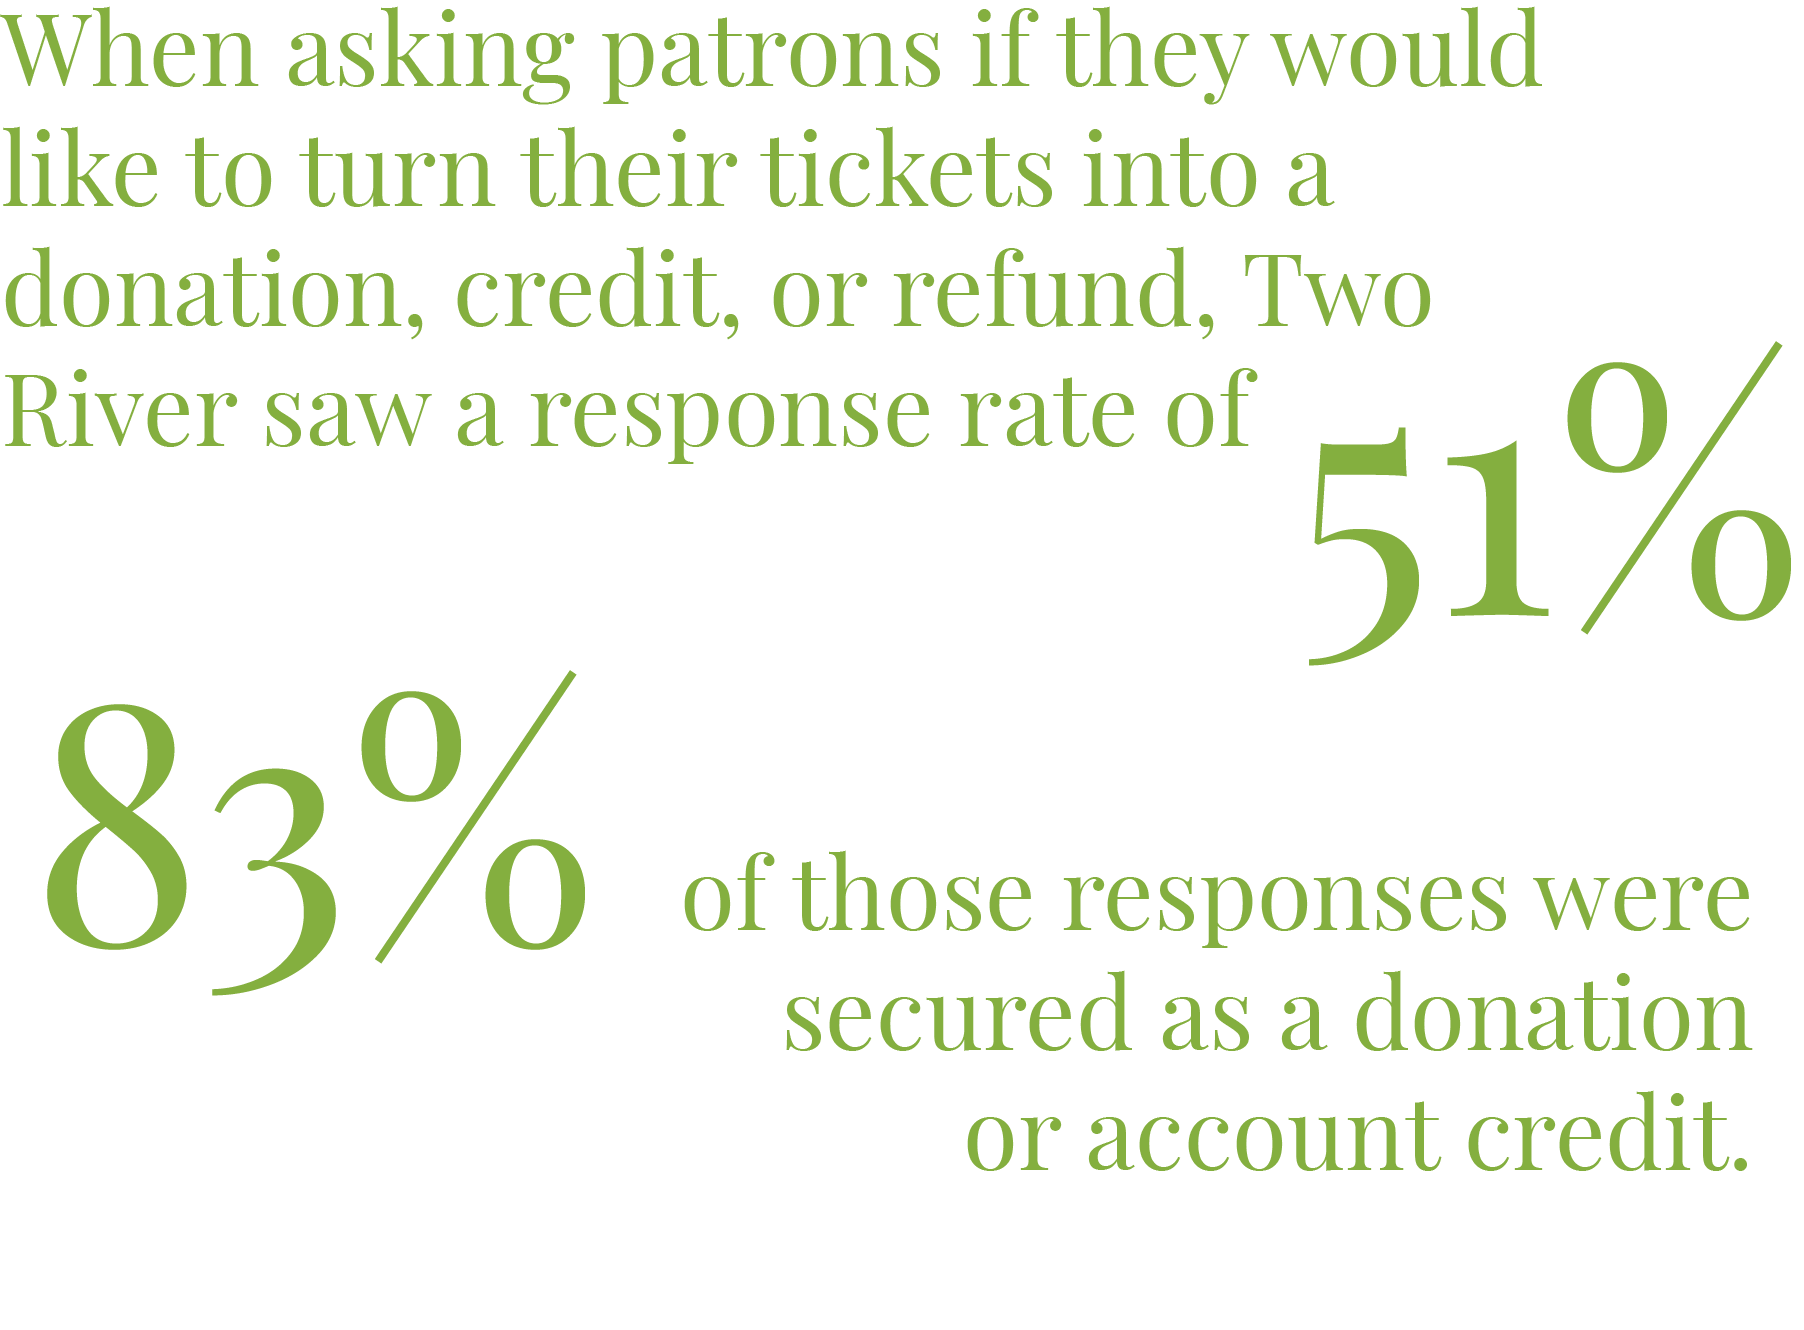 When asking patrons if they would like to turn their tickets into a donation, credit, or refund, Two River saw a response rate of 51%. 83% of those responses were secured as a donation or account credit. 